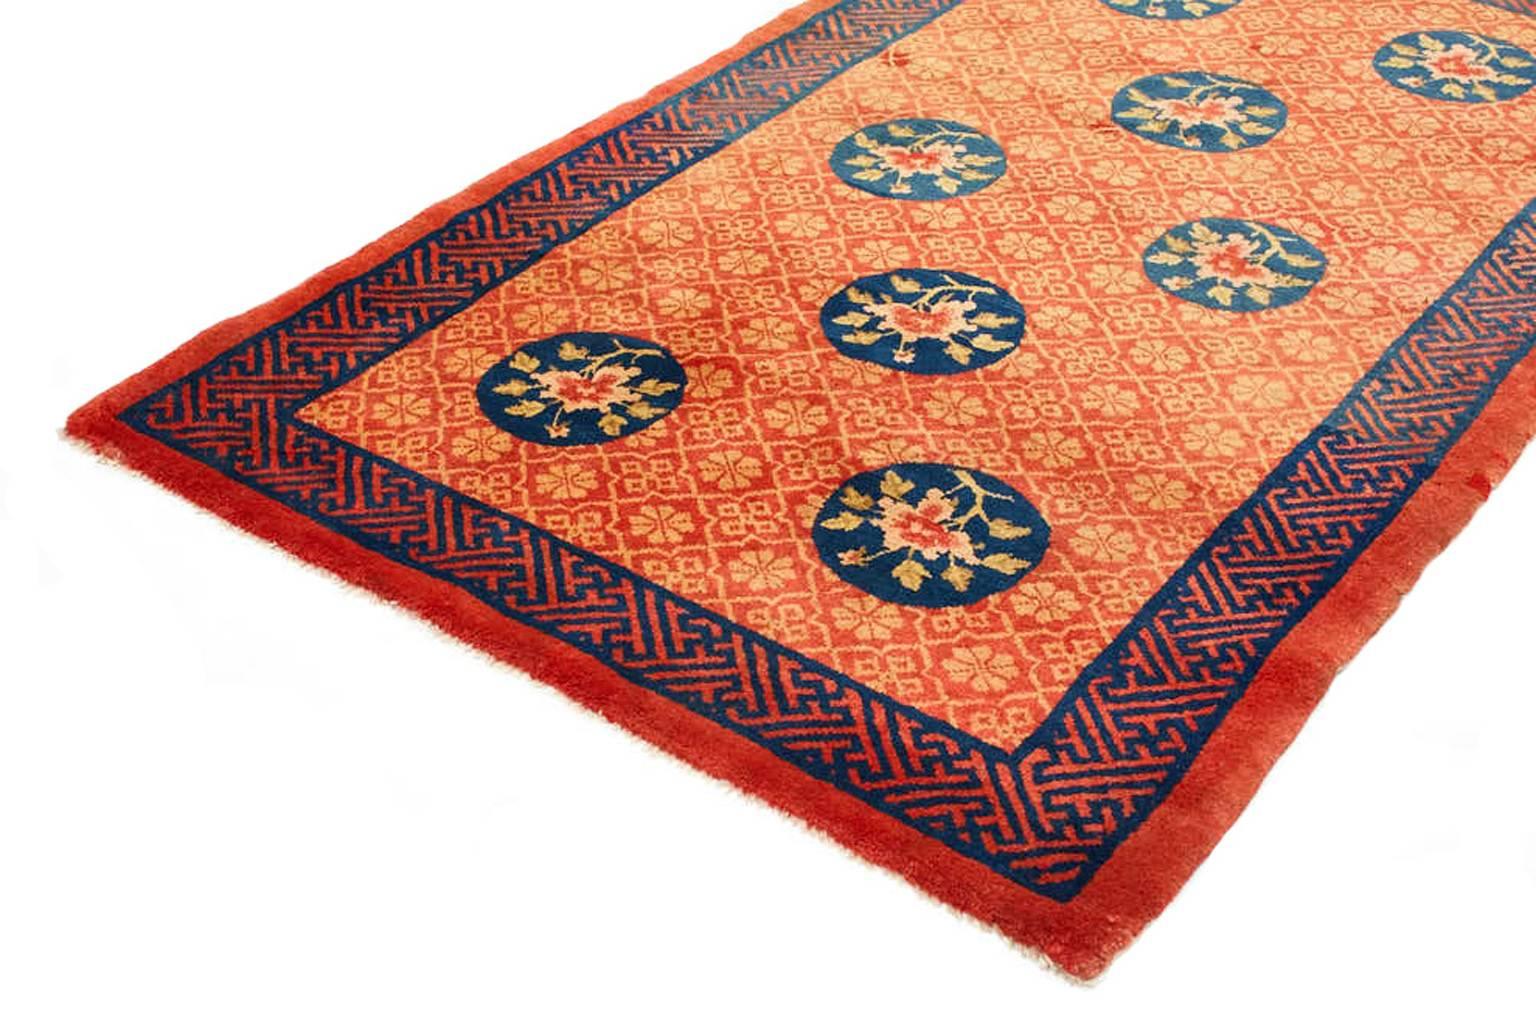 Individually selected by Madeline during her travels, this vintage Pao Tu rug features traditional floral medallions against a richly colored ground. Navy accents and bright colors are distinct characteristics of Oriental carpets and create a focal